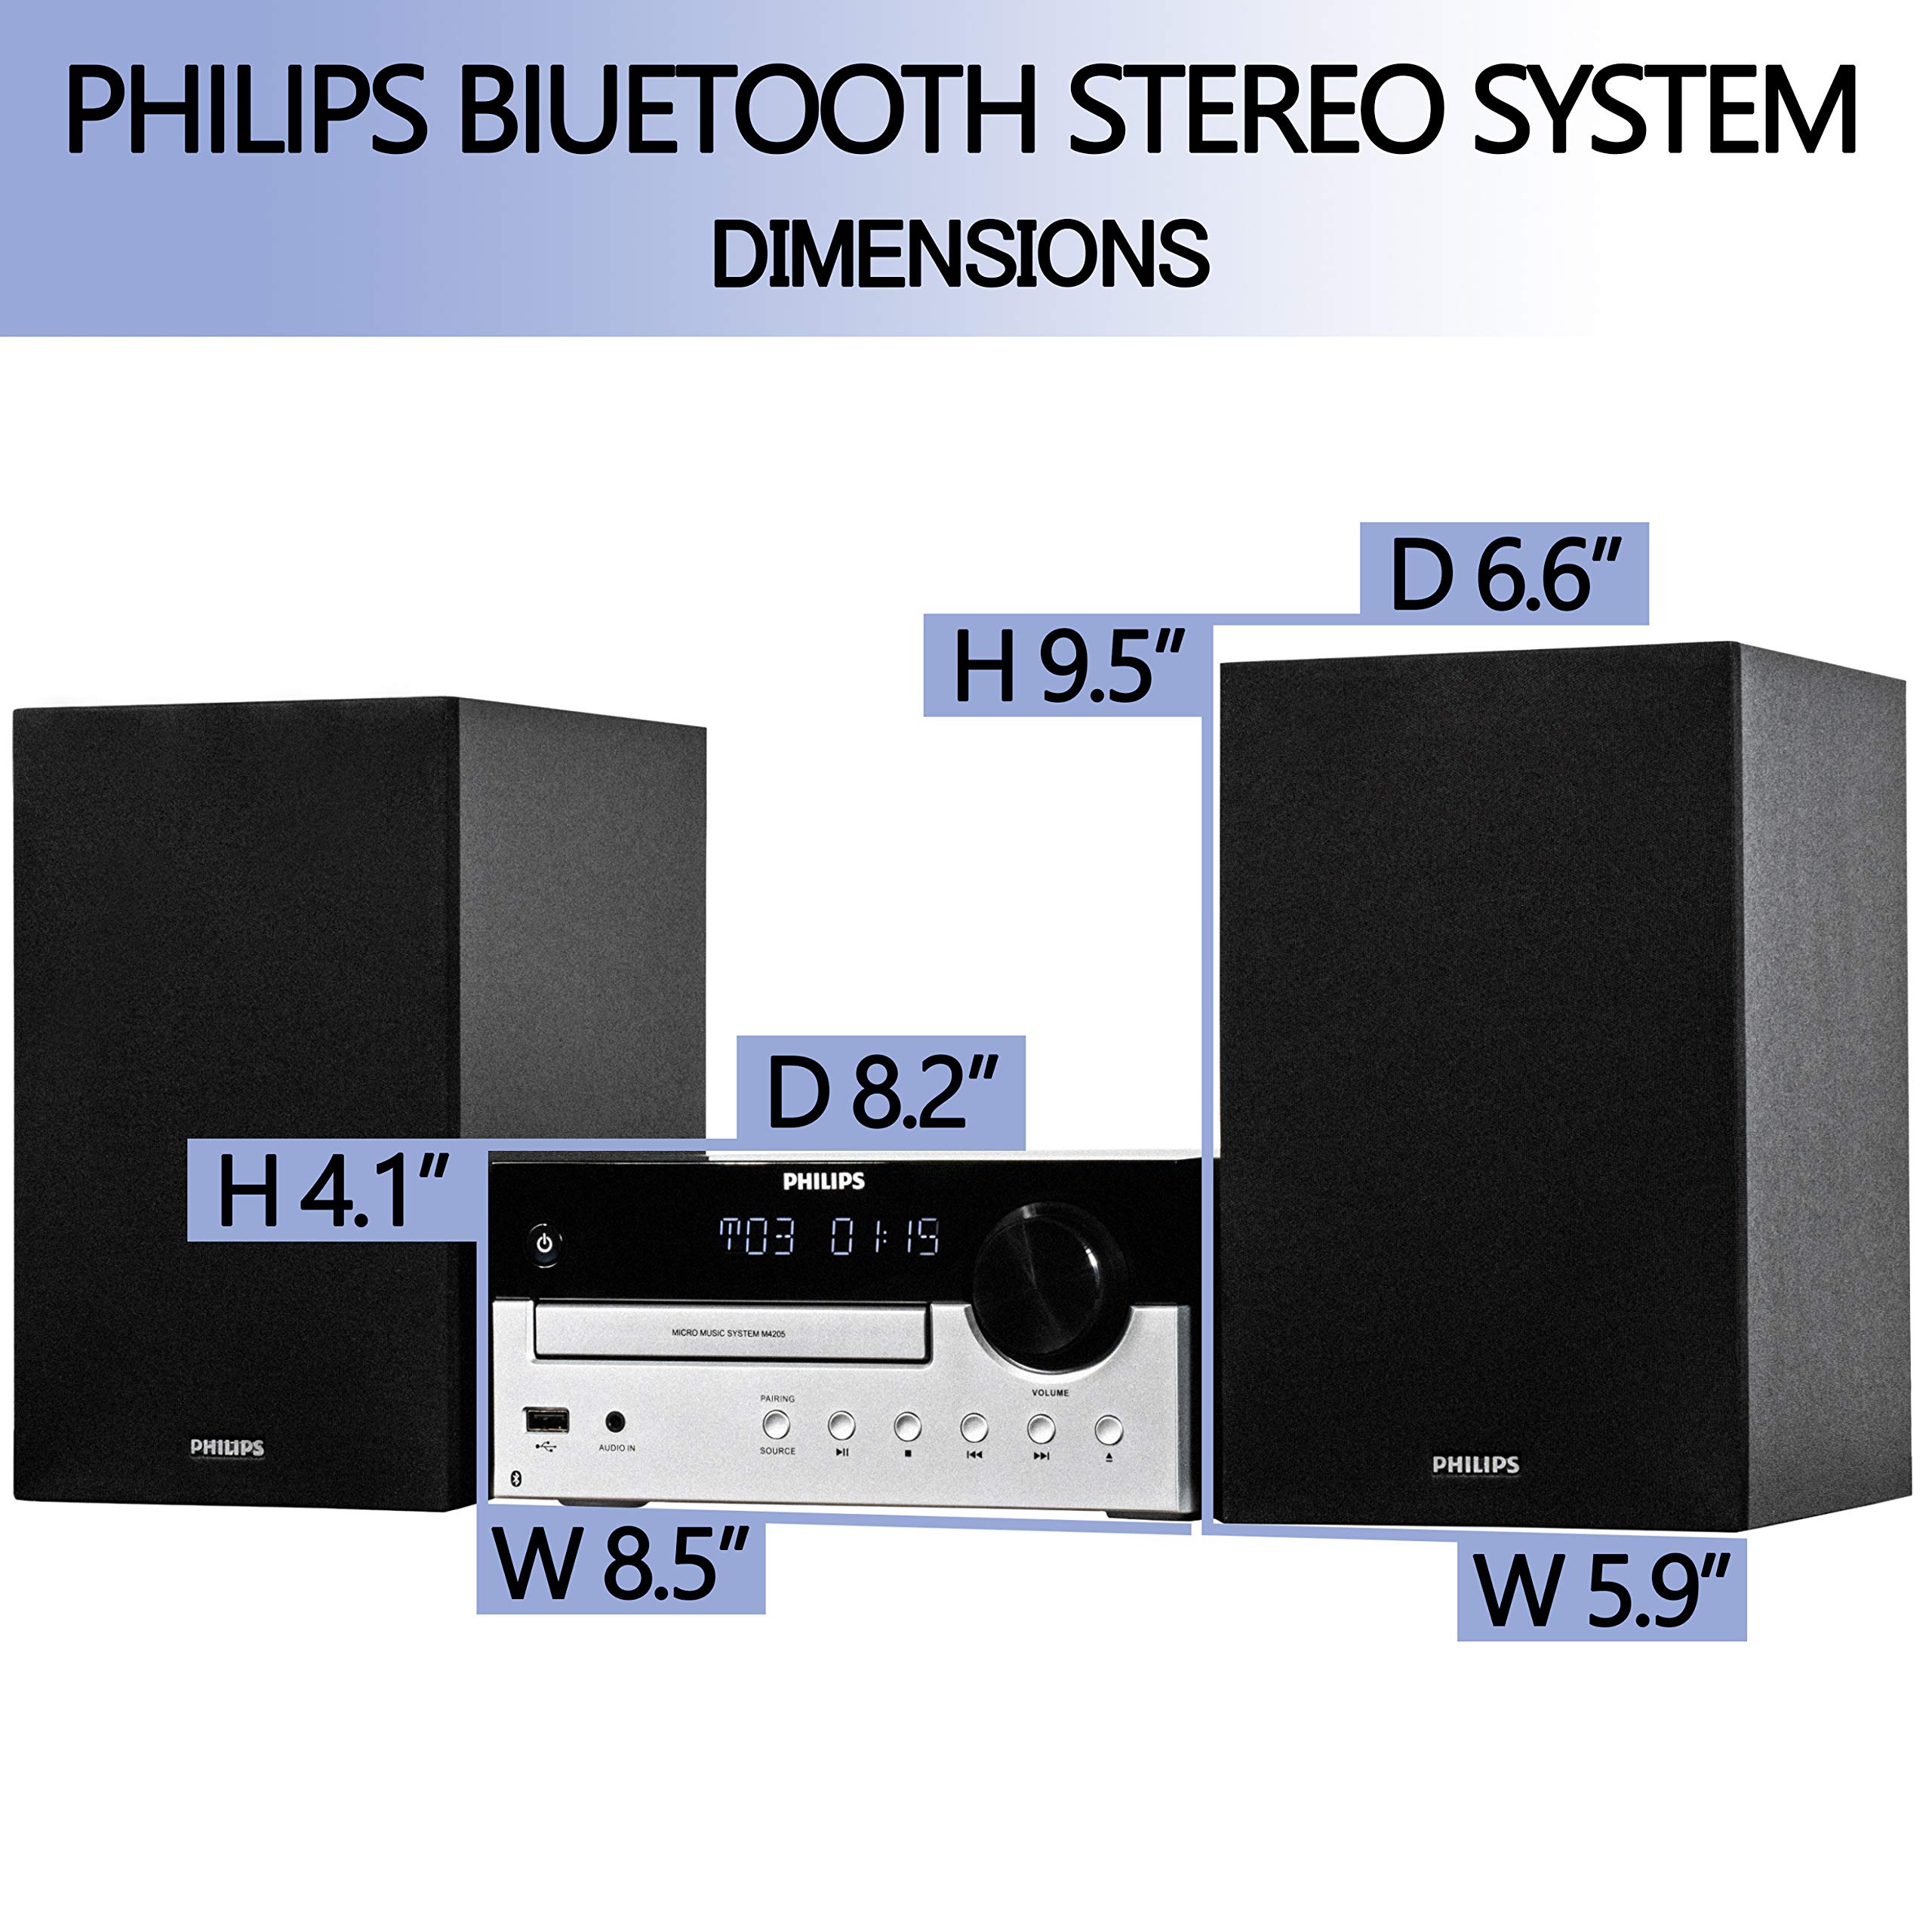 Mua PHILIPS Bluetooth Stereo System for Home with CD Player, MP3, USB,  Audio in, FM Radio, Bass Reflex Speaker, 60W, Remote Control Included trên  Amazon Mỹ chính hãng 2023 | Giaonhan247